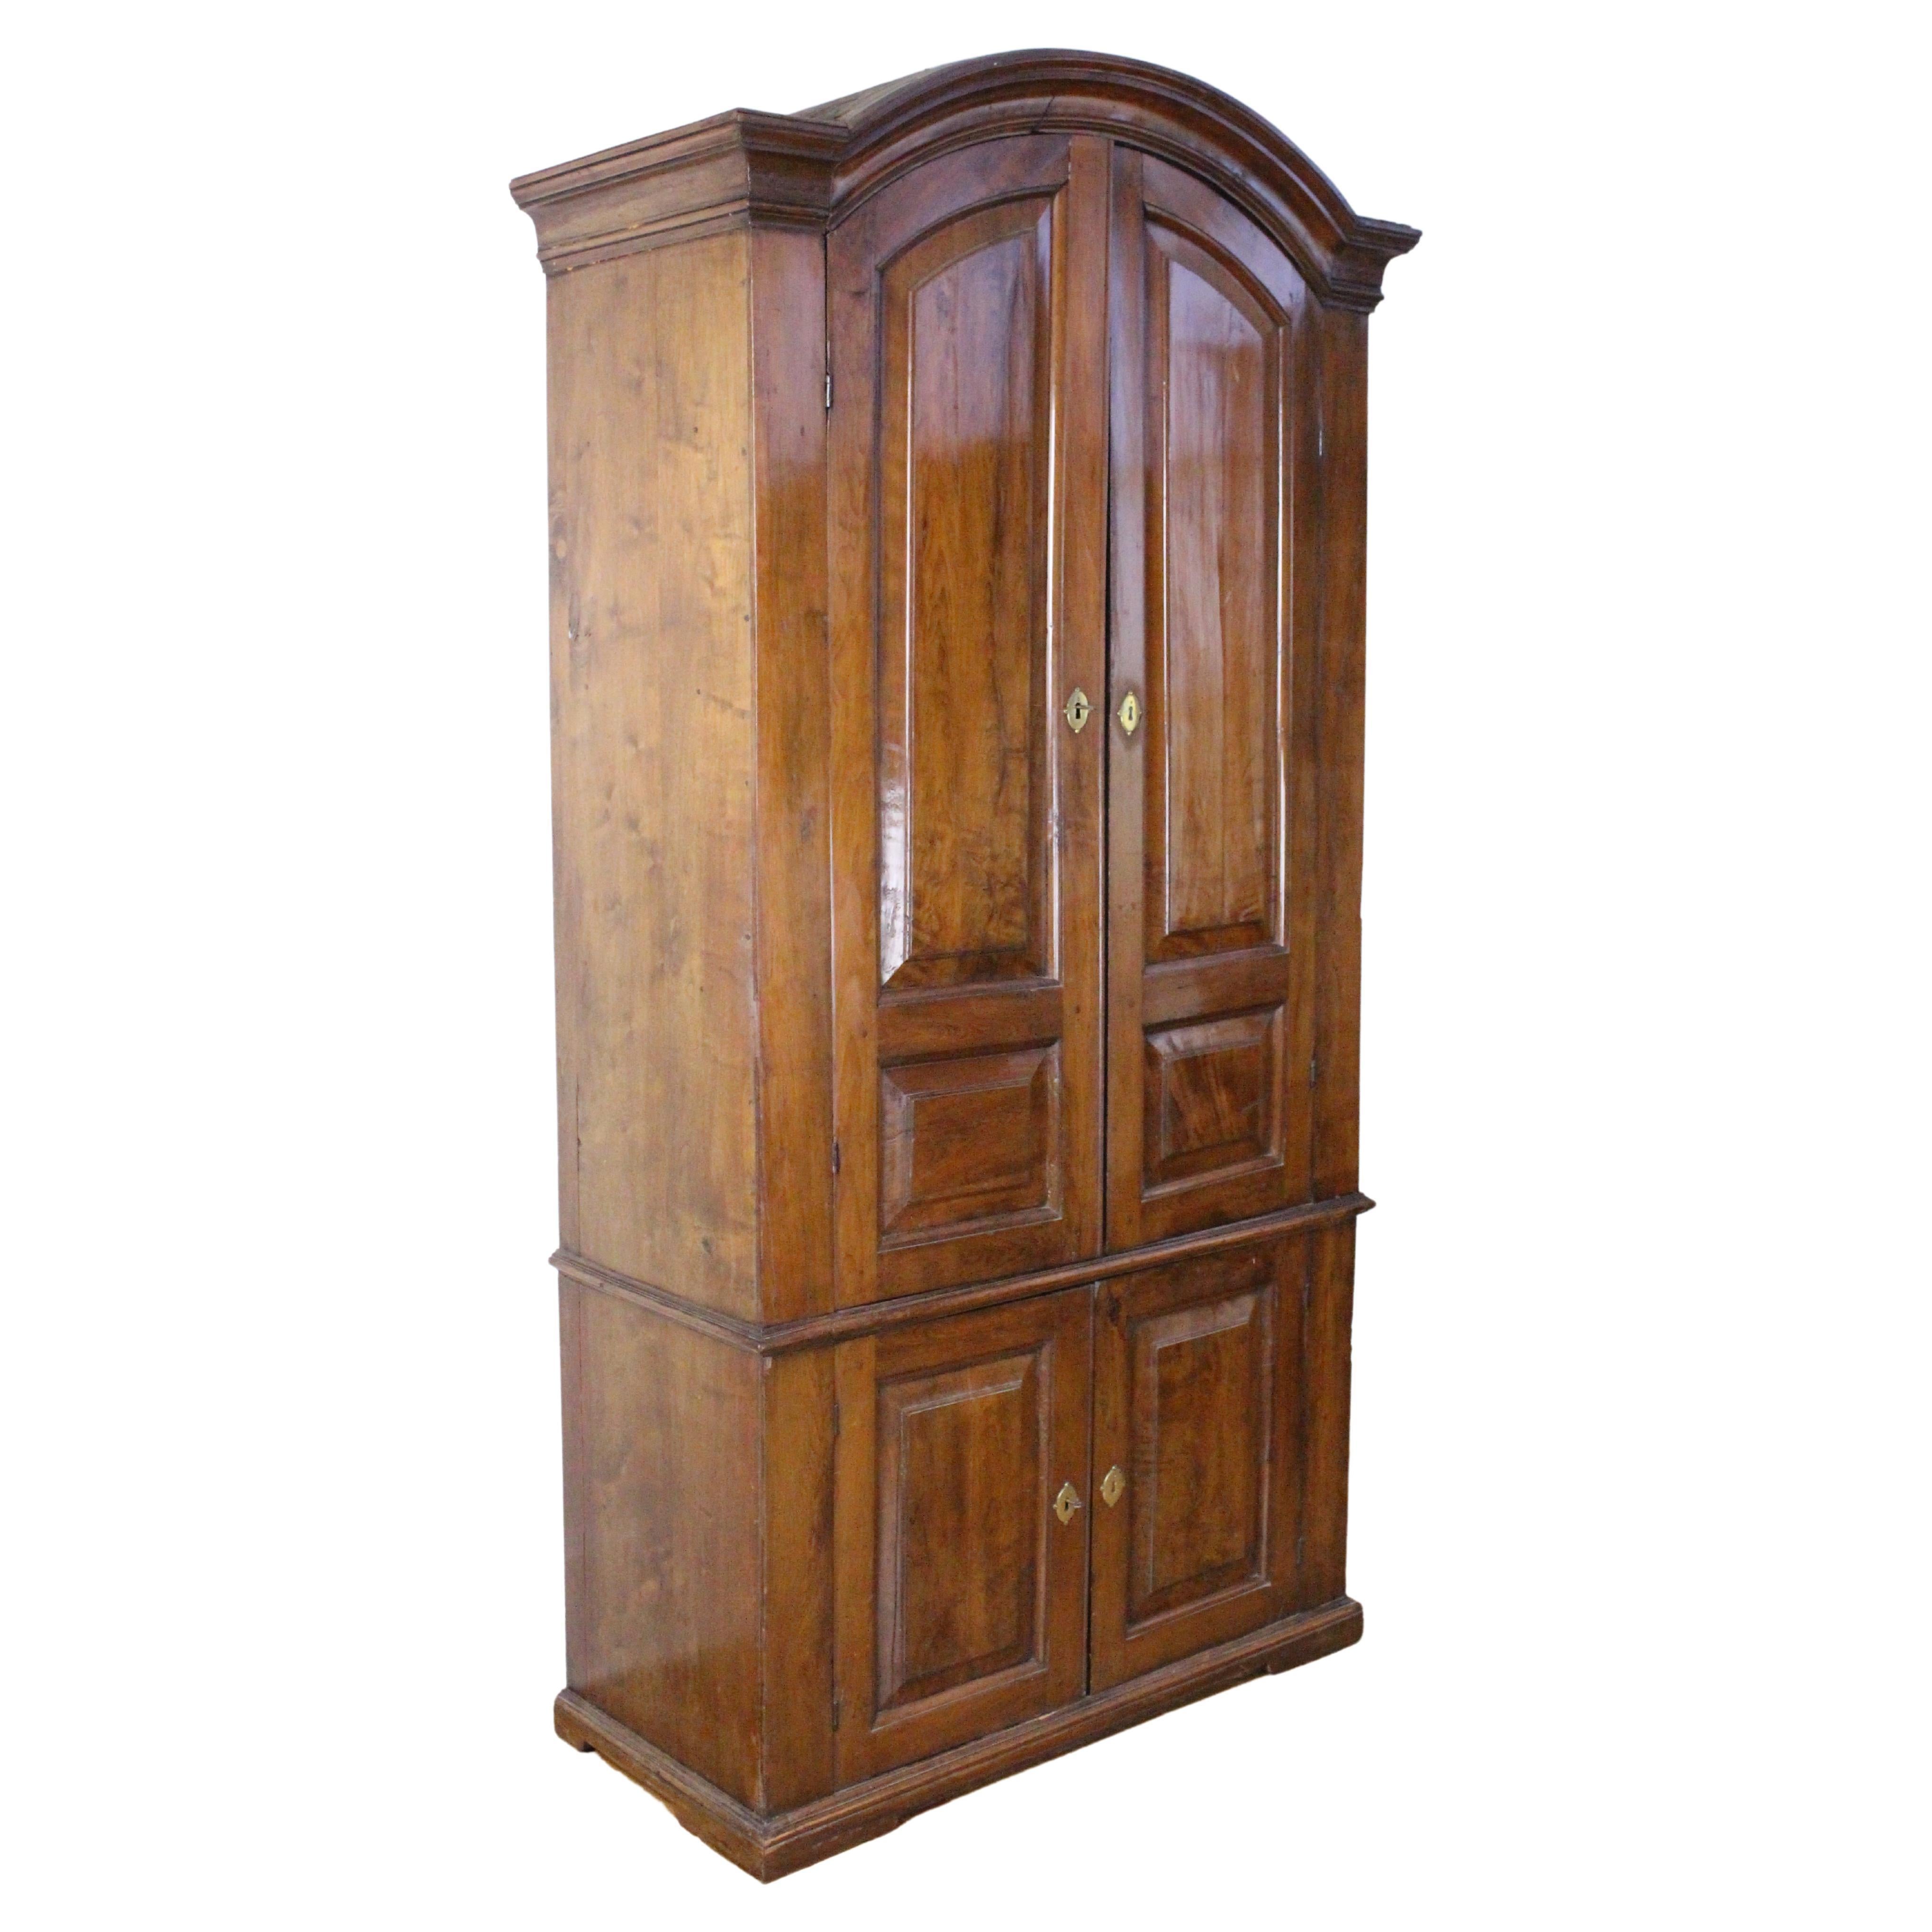 Early 19th Century Yew Wood Linen Cupboard For Sale